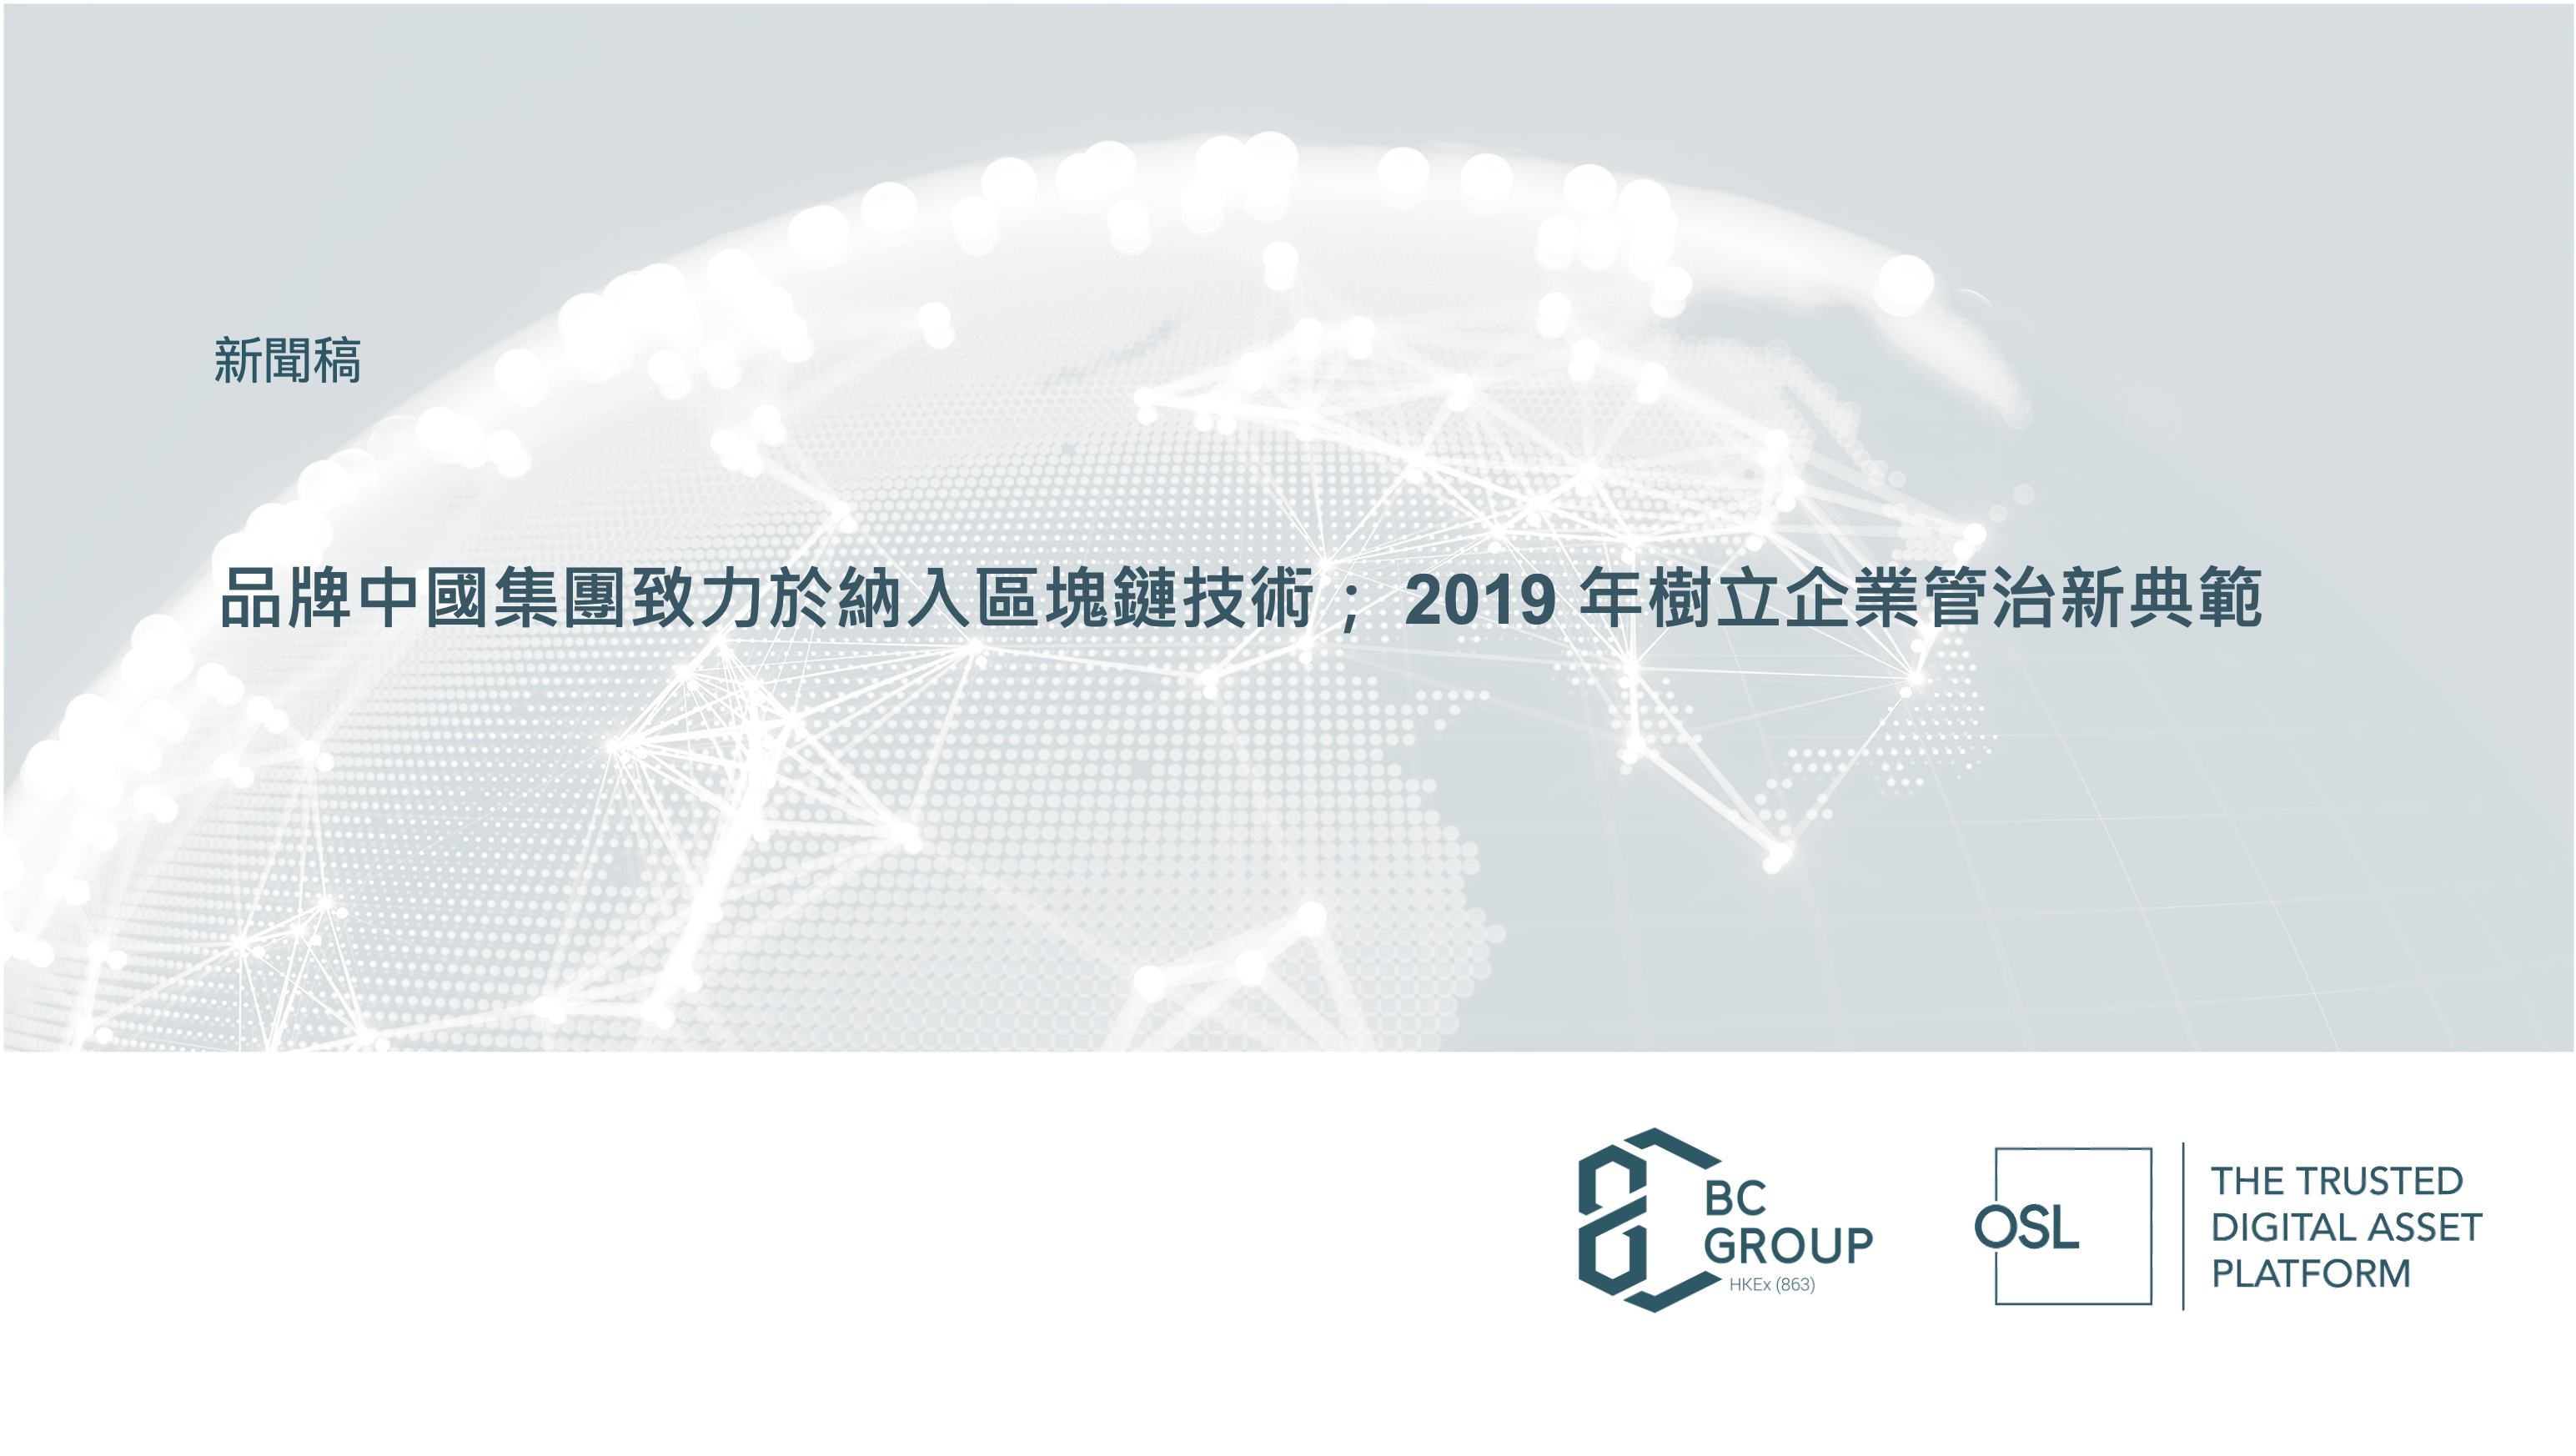 Branding China Group Strives to incorporate Blockchain technology; Sets New Benchmarks in Corporate Governance in 2019